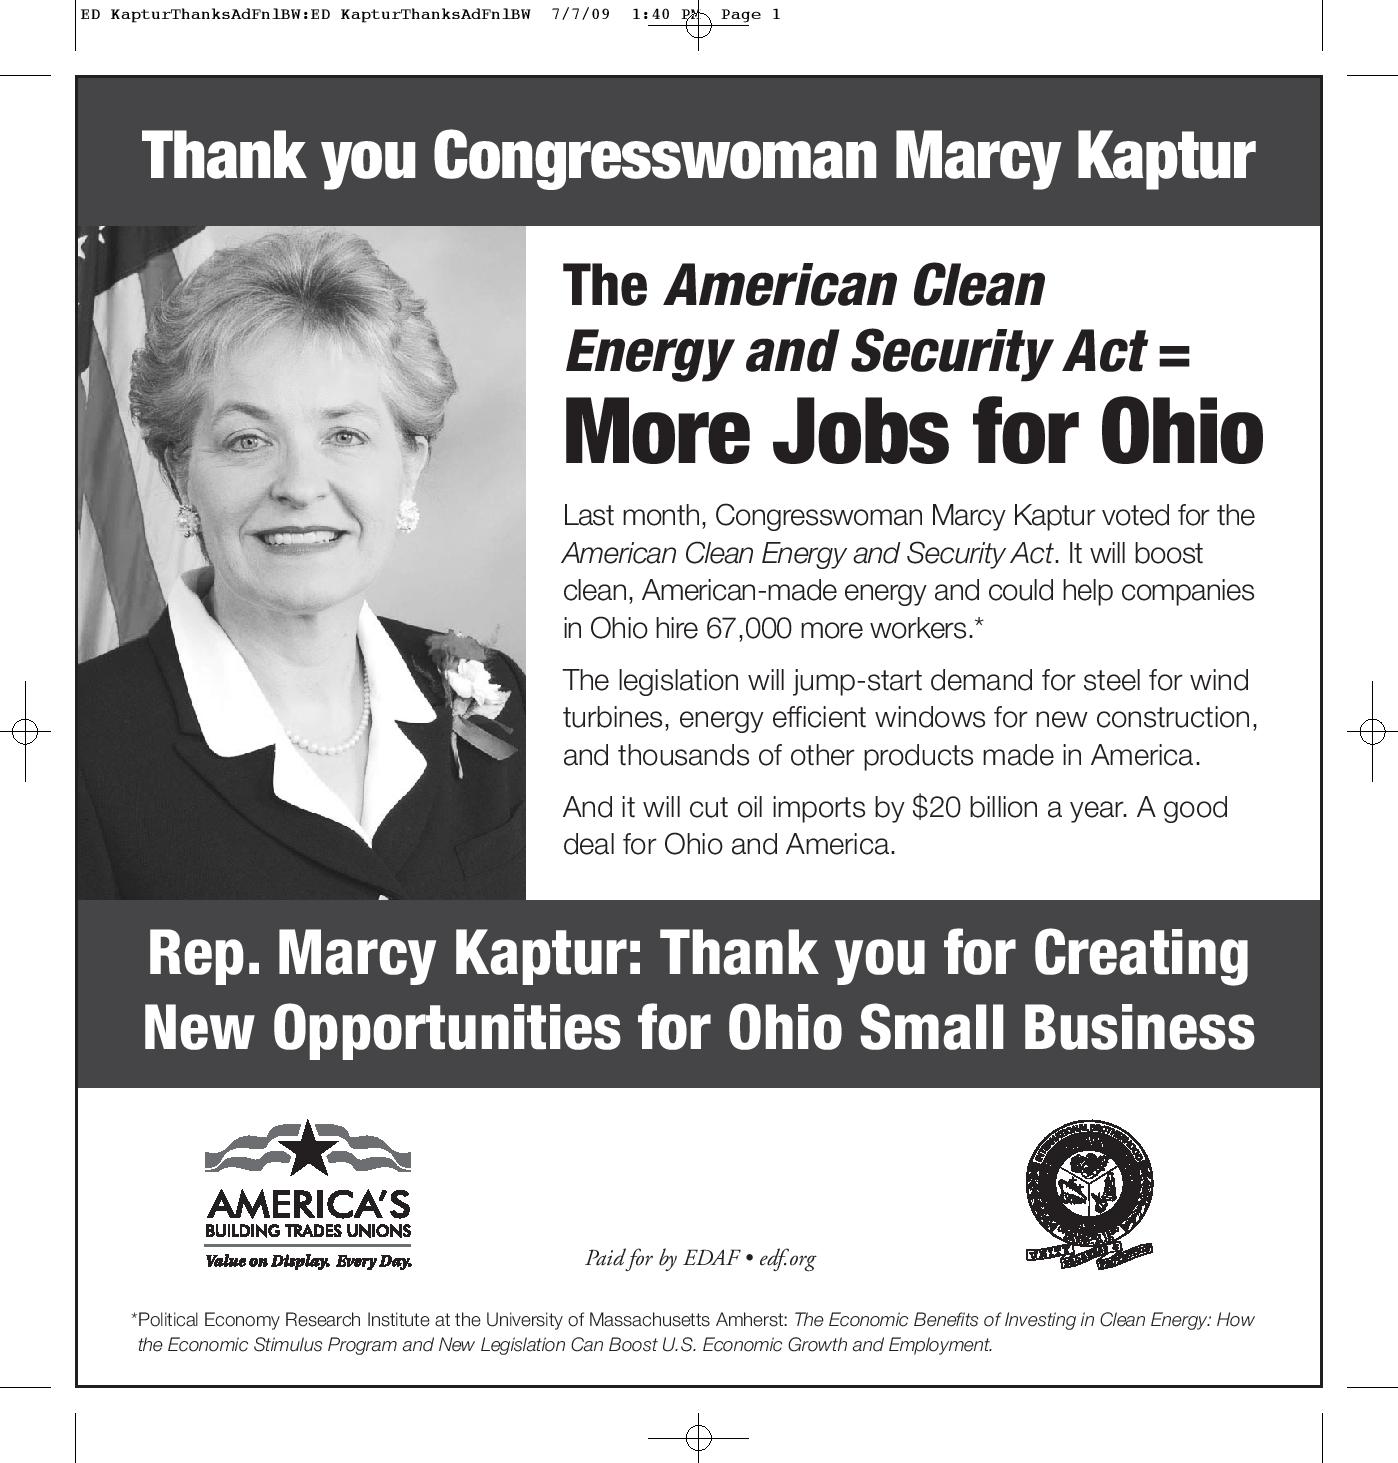 Thank You for Supporting the American Clean Energy and Security Act: Rep. Marcy Kaptur